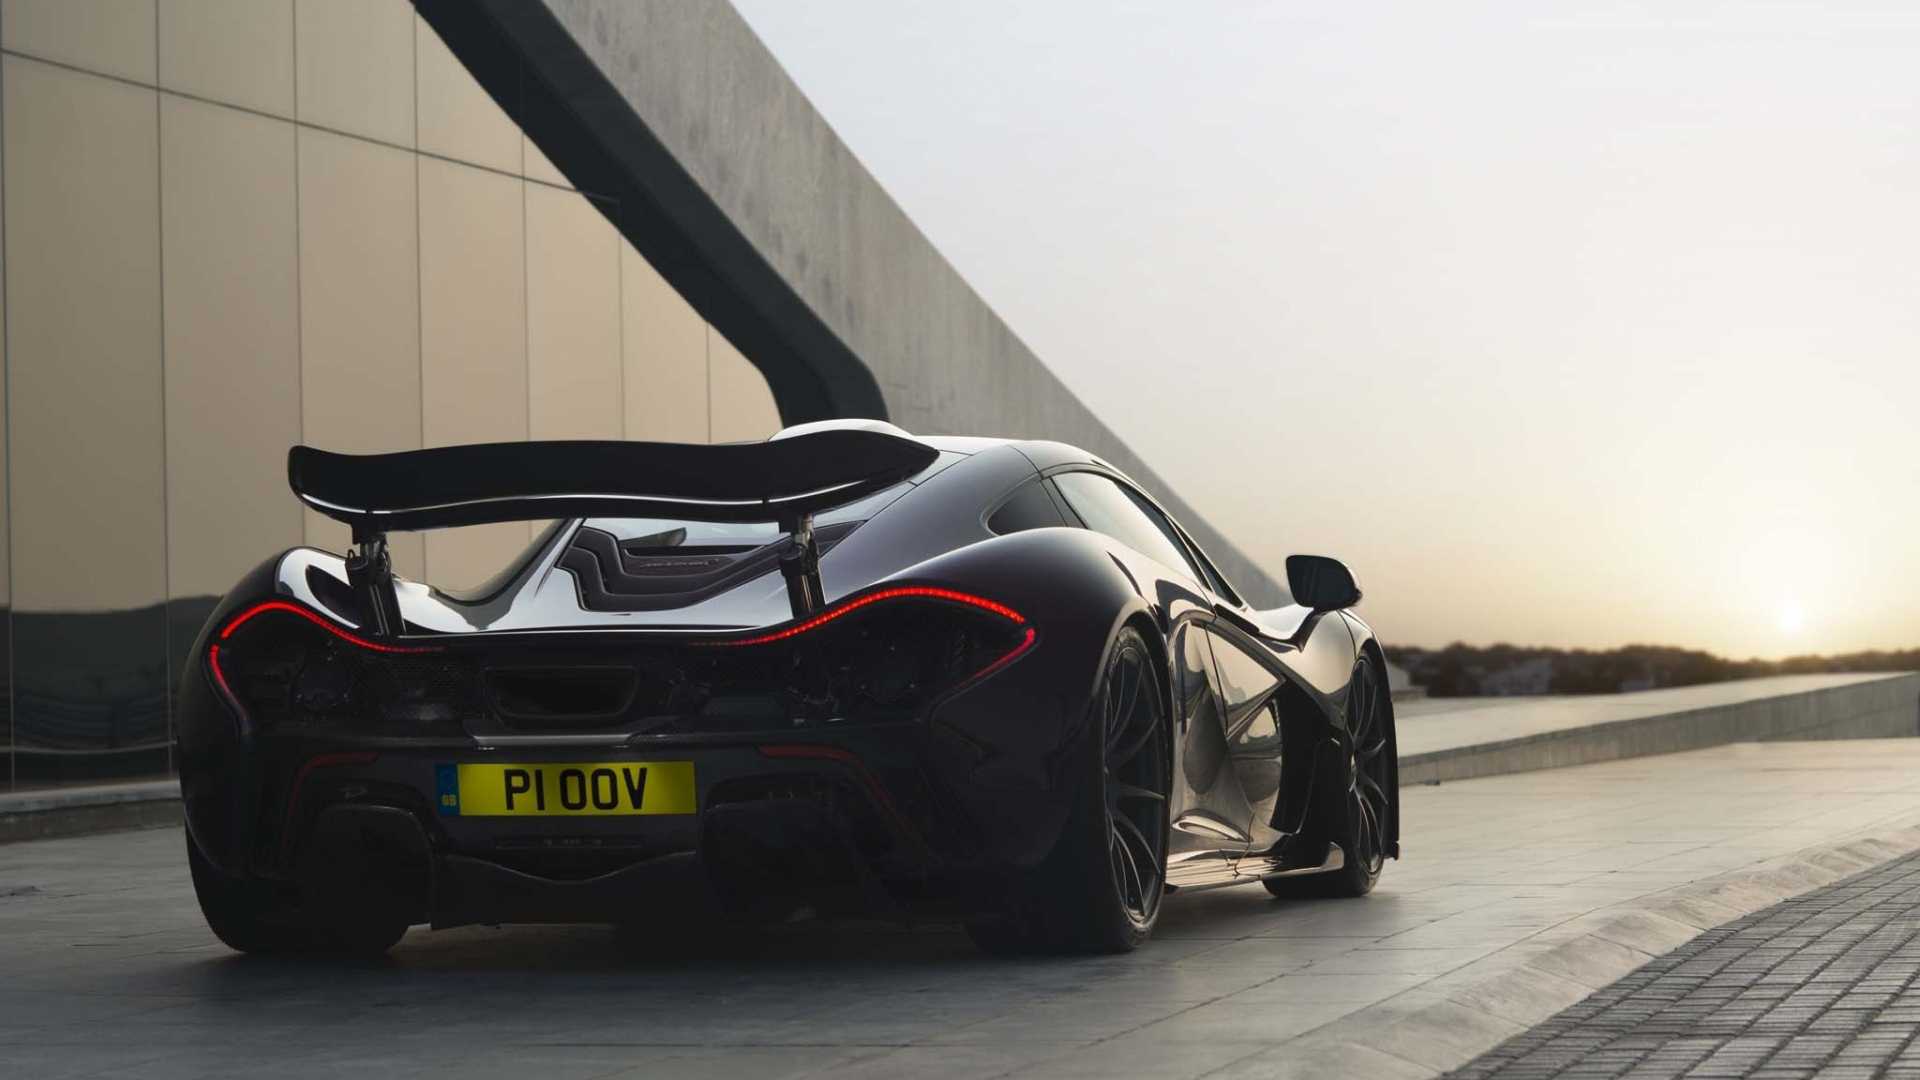 Wallpaper New Mclaren Cars HD High Resolution All On Image Their